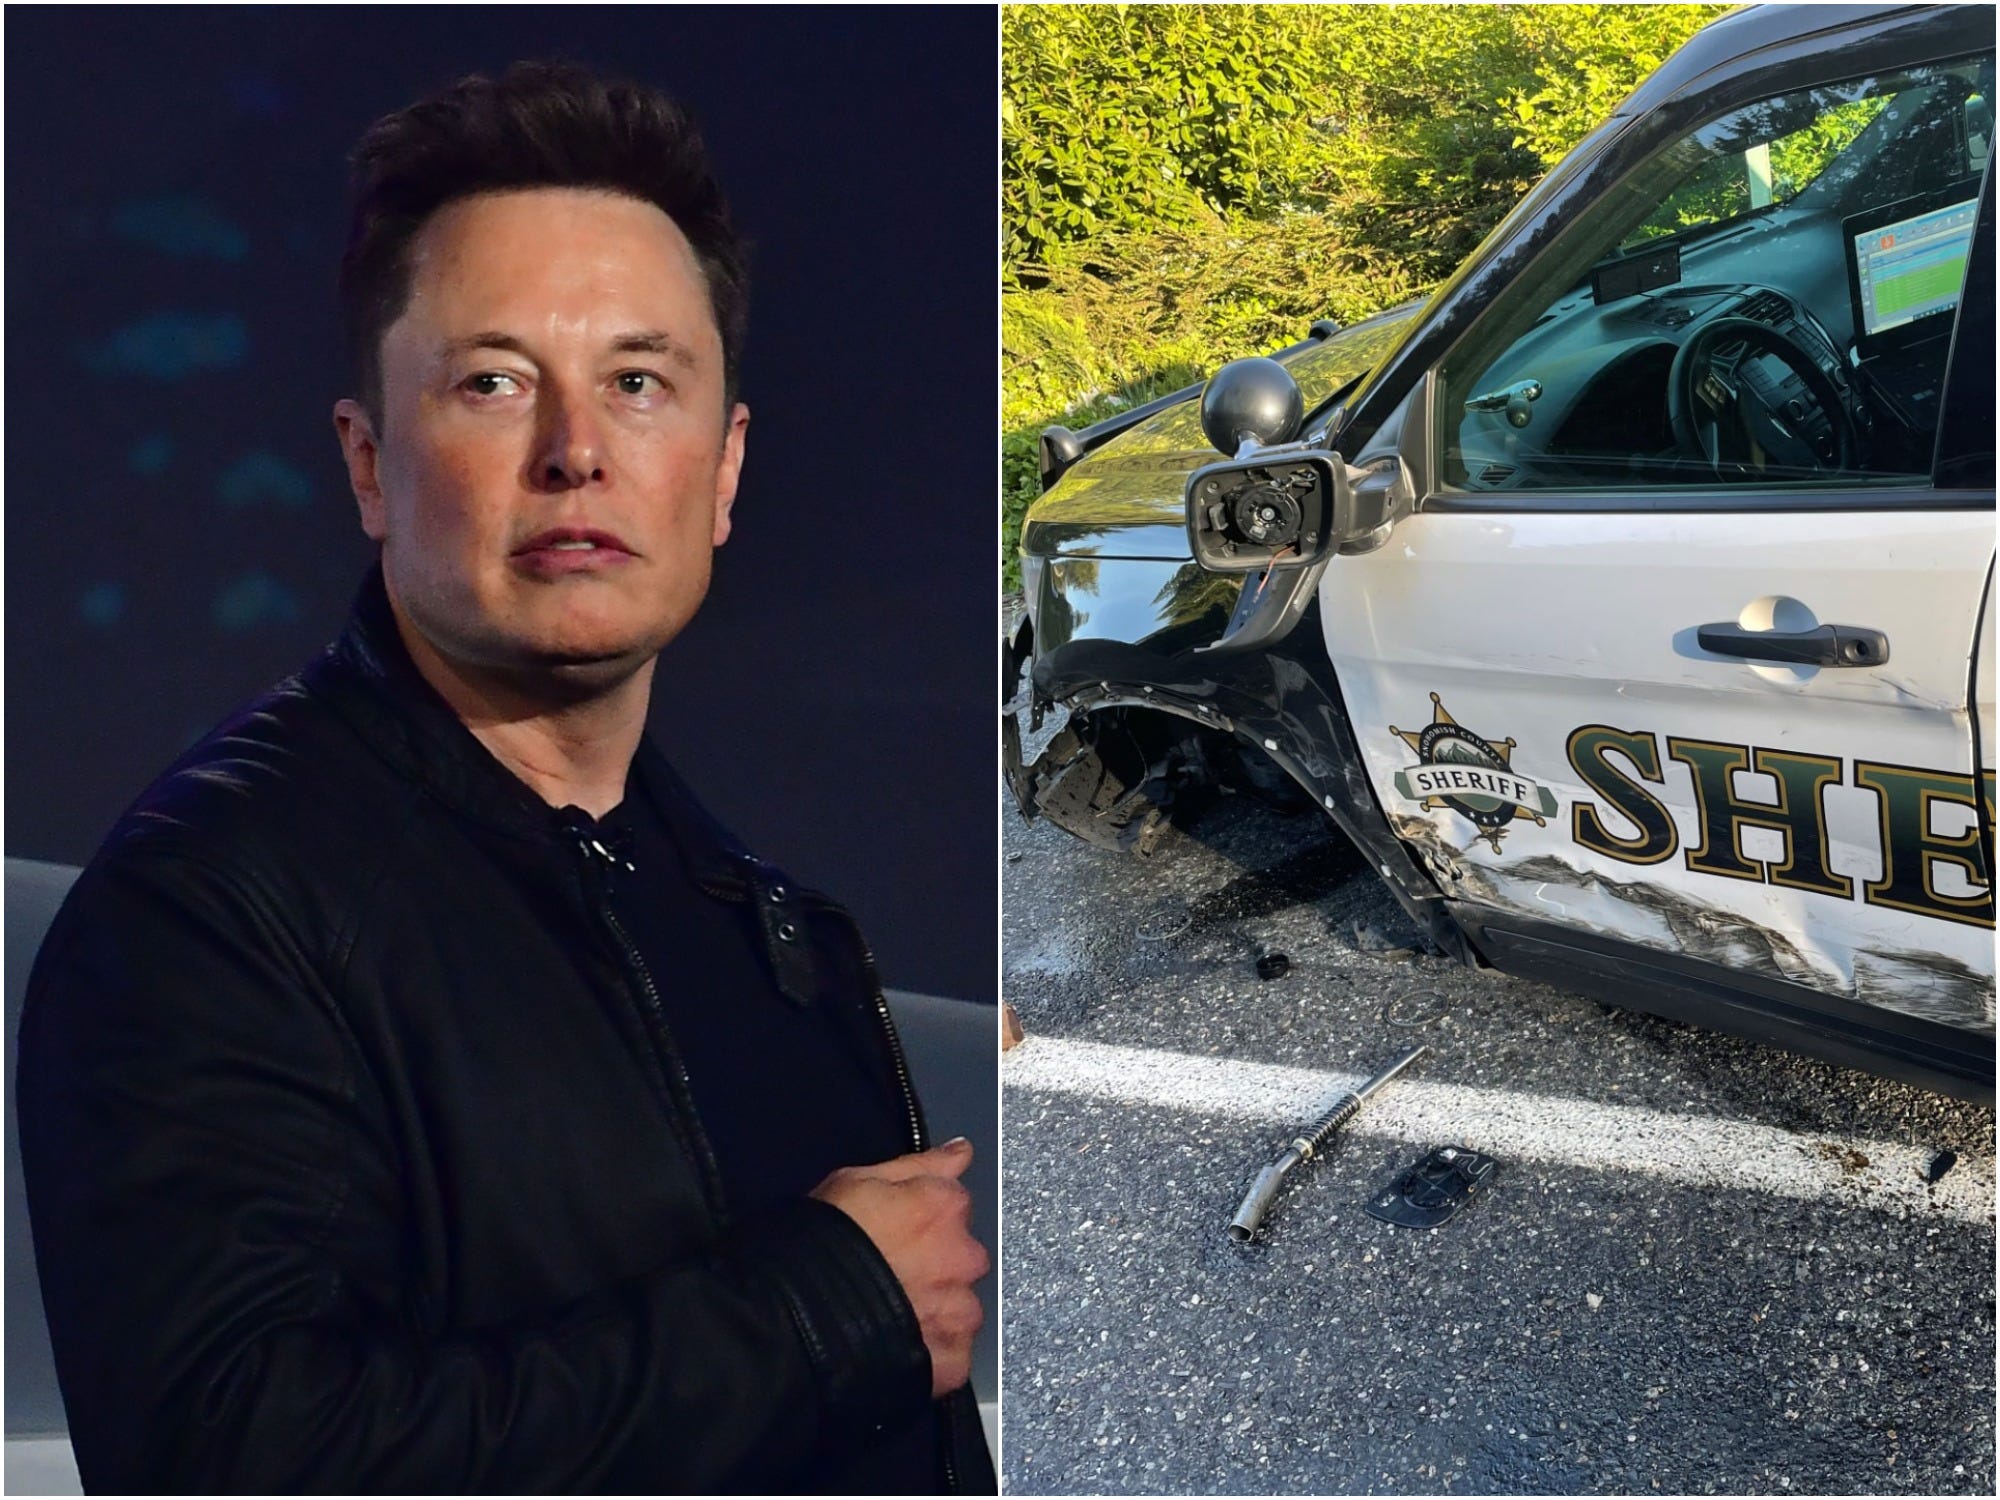 Tesla CEO Elon Musk next to a picture of the vehicle damaged by a Tesla on Autopilot